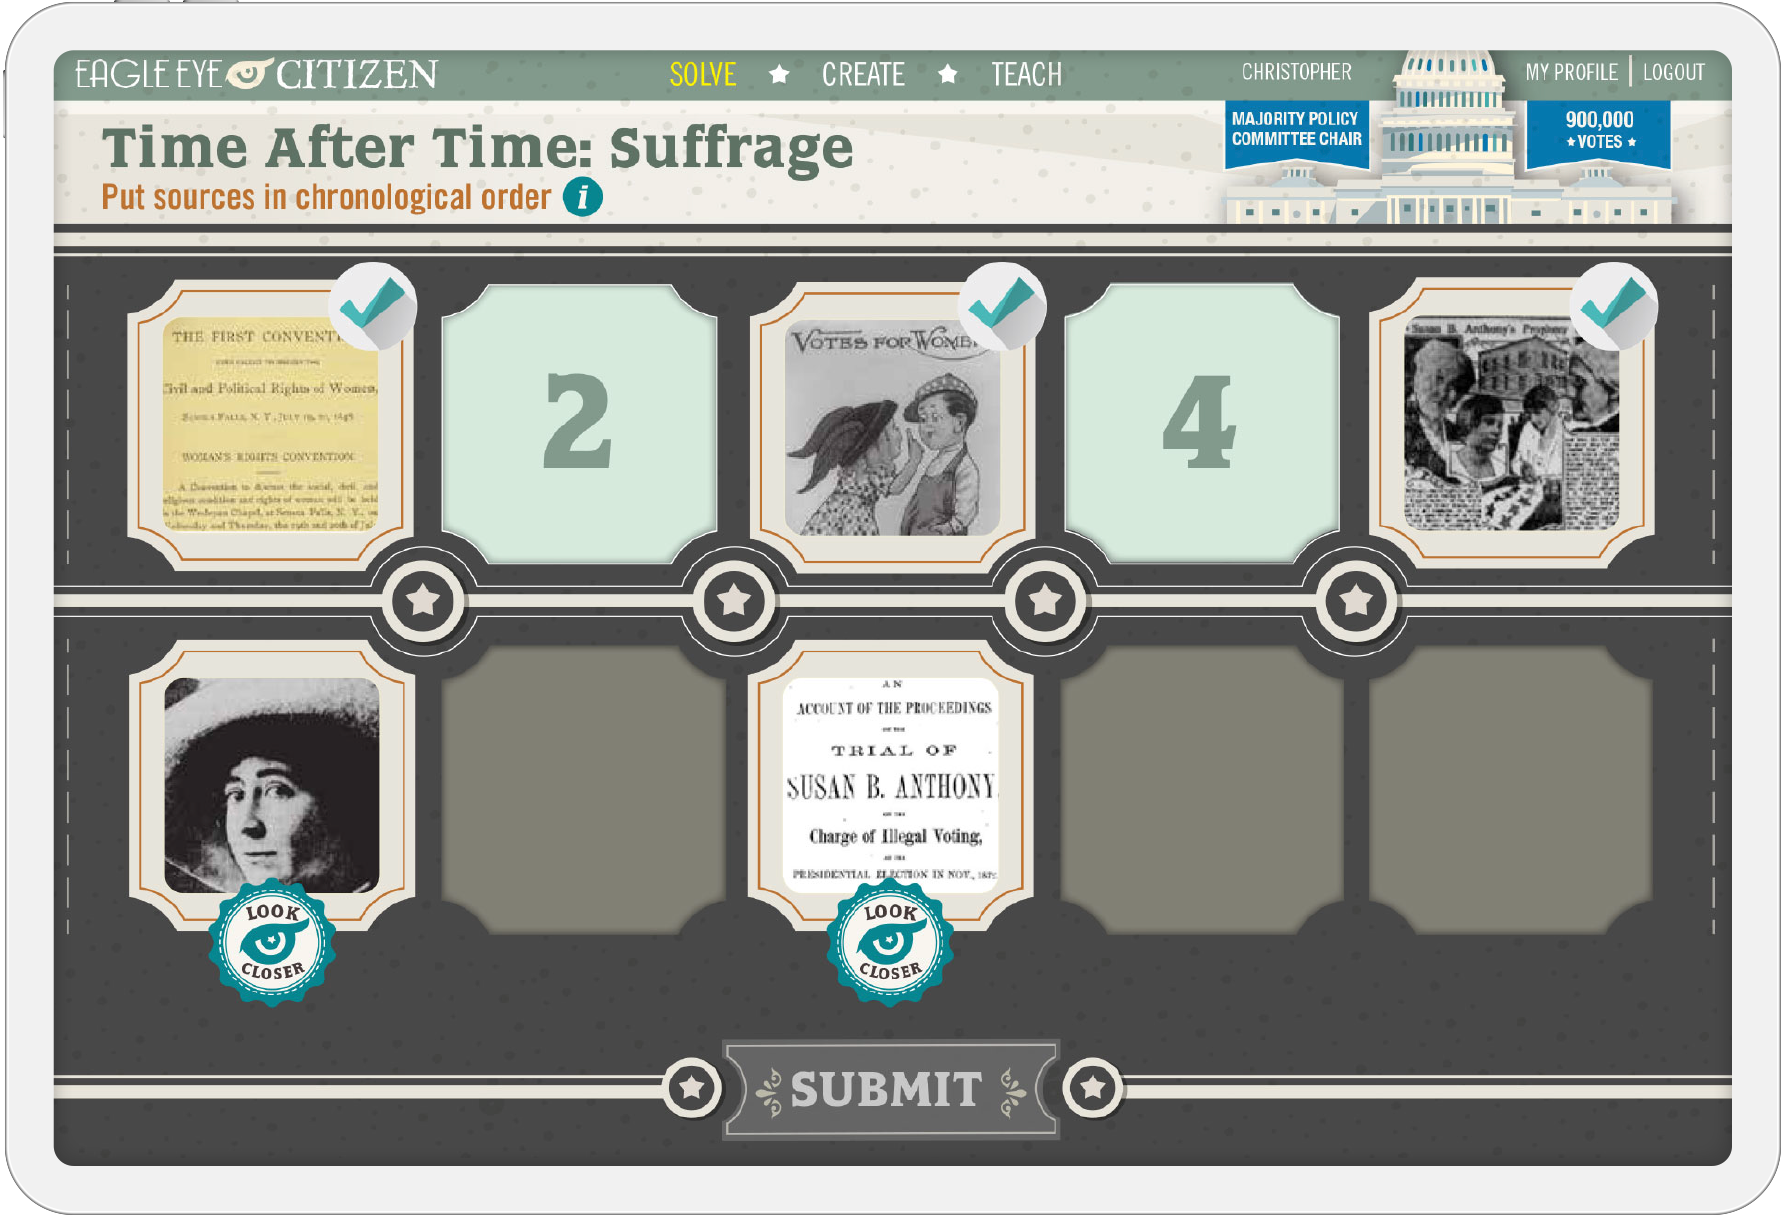 Screengrab of a Time After Time challenge from the Eagle Eye Citizen website for the topic of Suffrage.